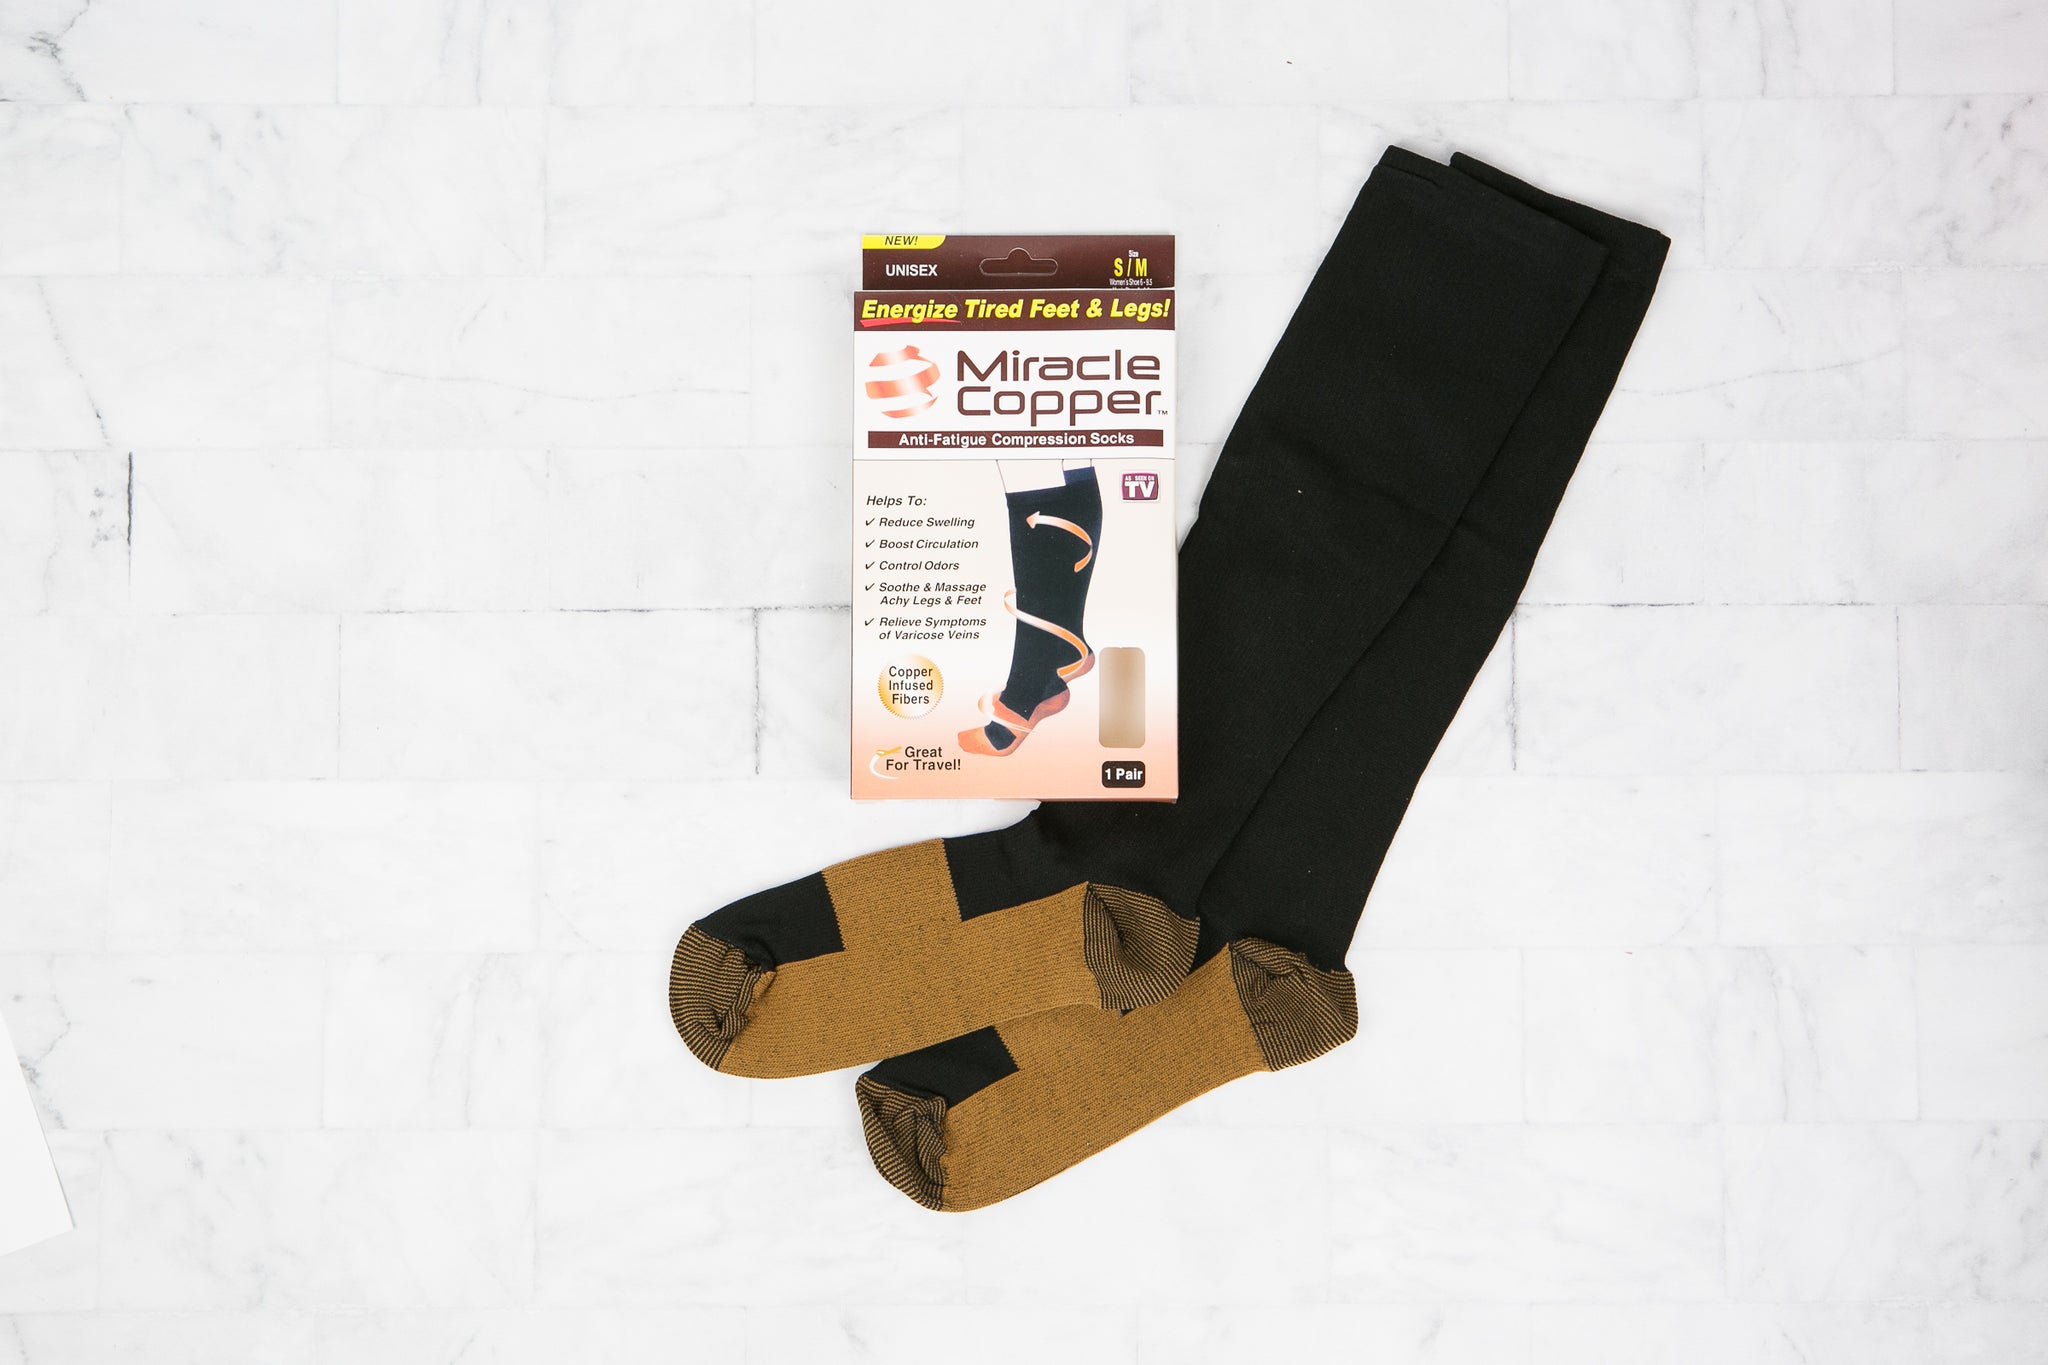 Miracle Copper Socks - As Seen on TV